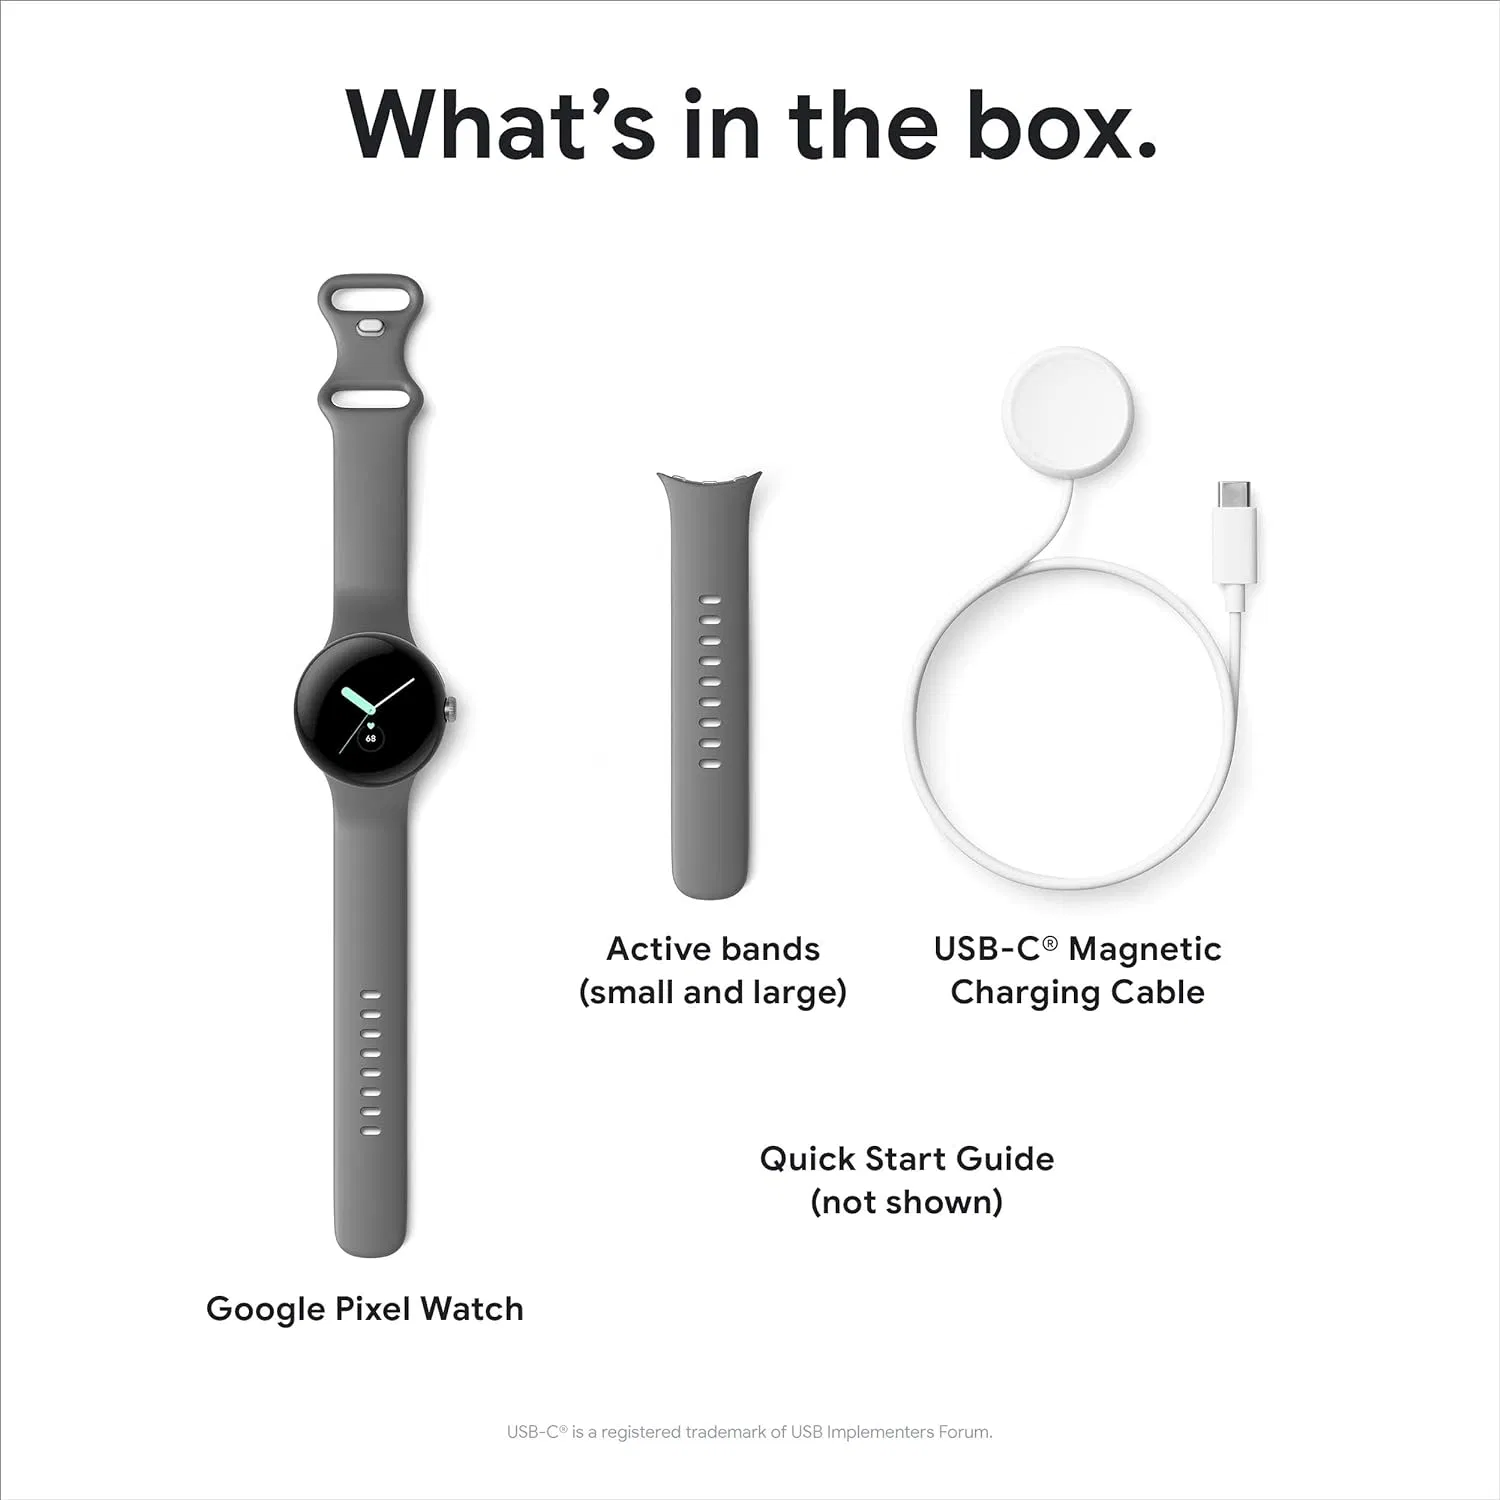 Google Pixel Watch Android Smartwatch with Fitbit Activity Tracking